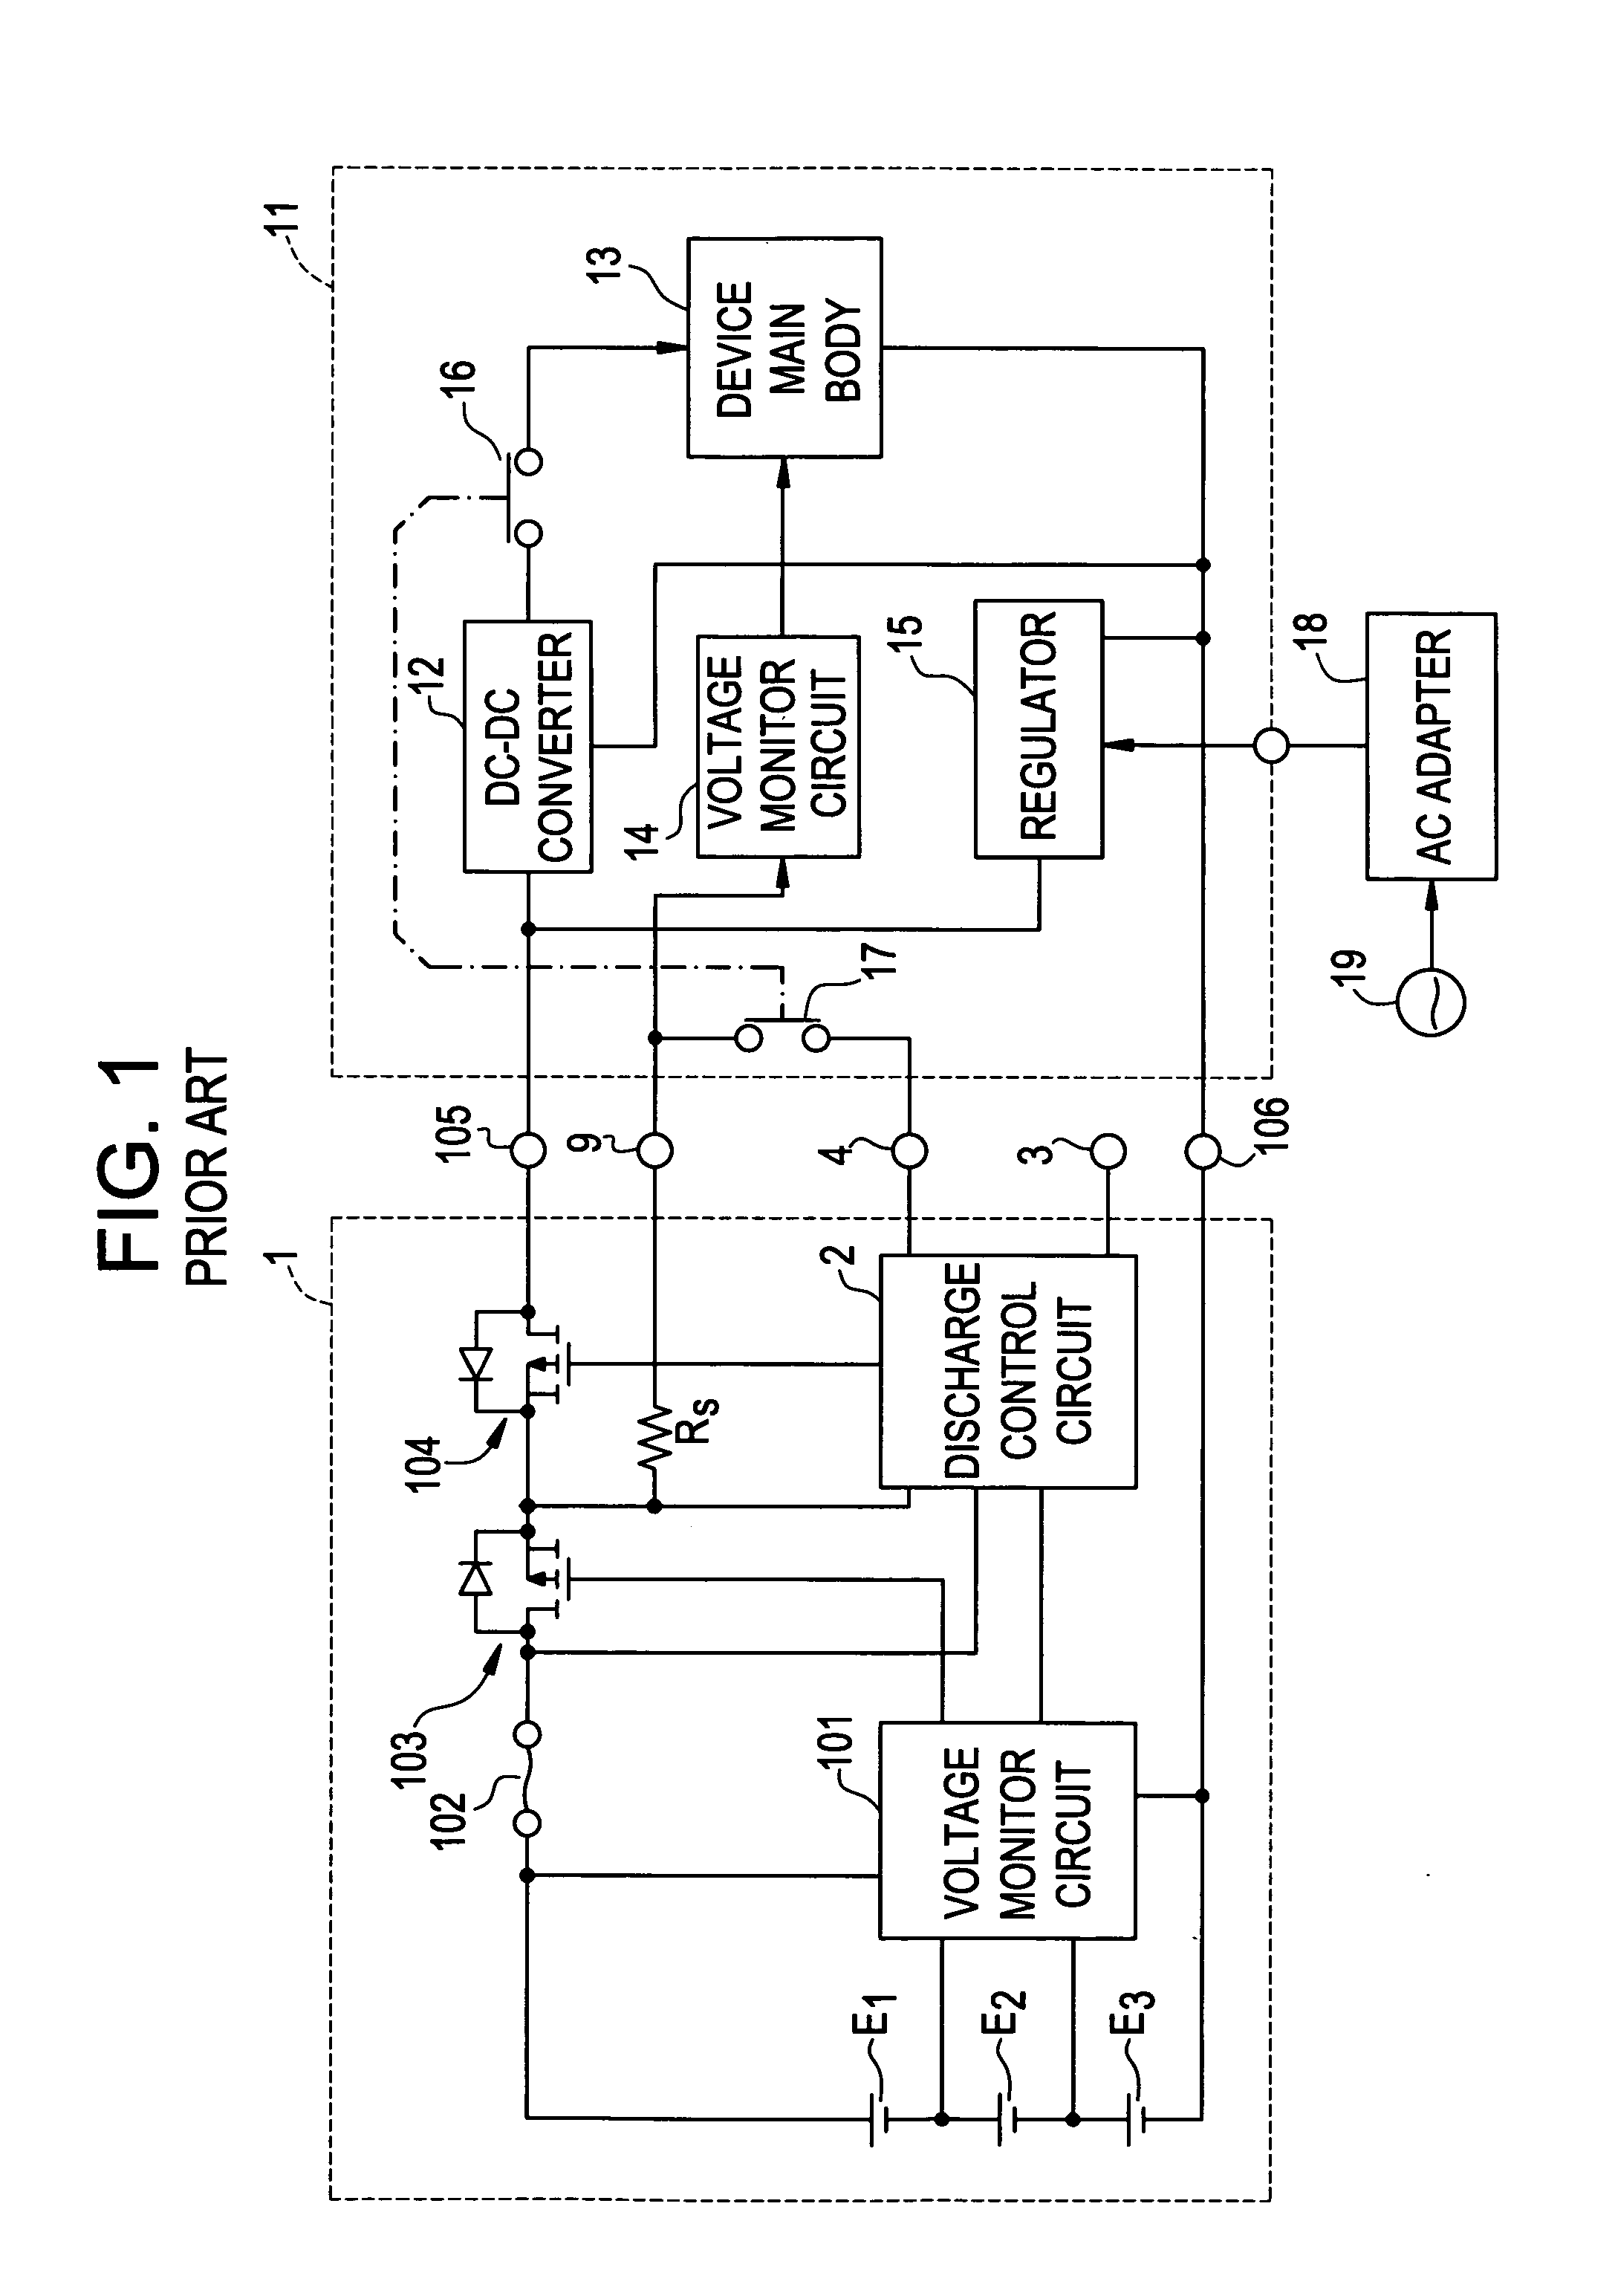 Methods of discharge control for a battery pack of a cordless power tool system, a cordless power tool system and battery pack adapted to provide over-discharge protection and discharge control